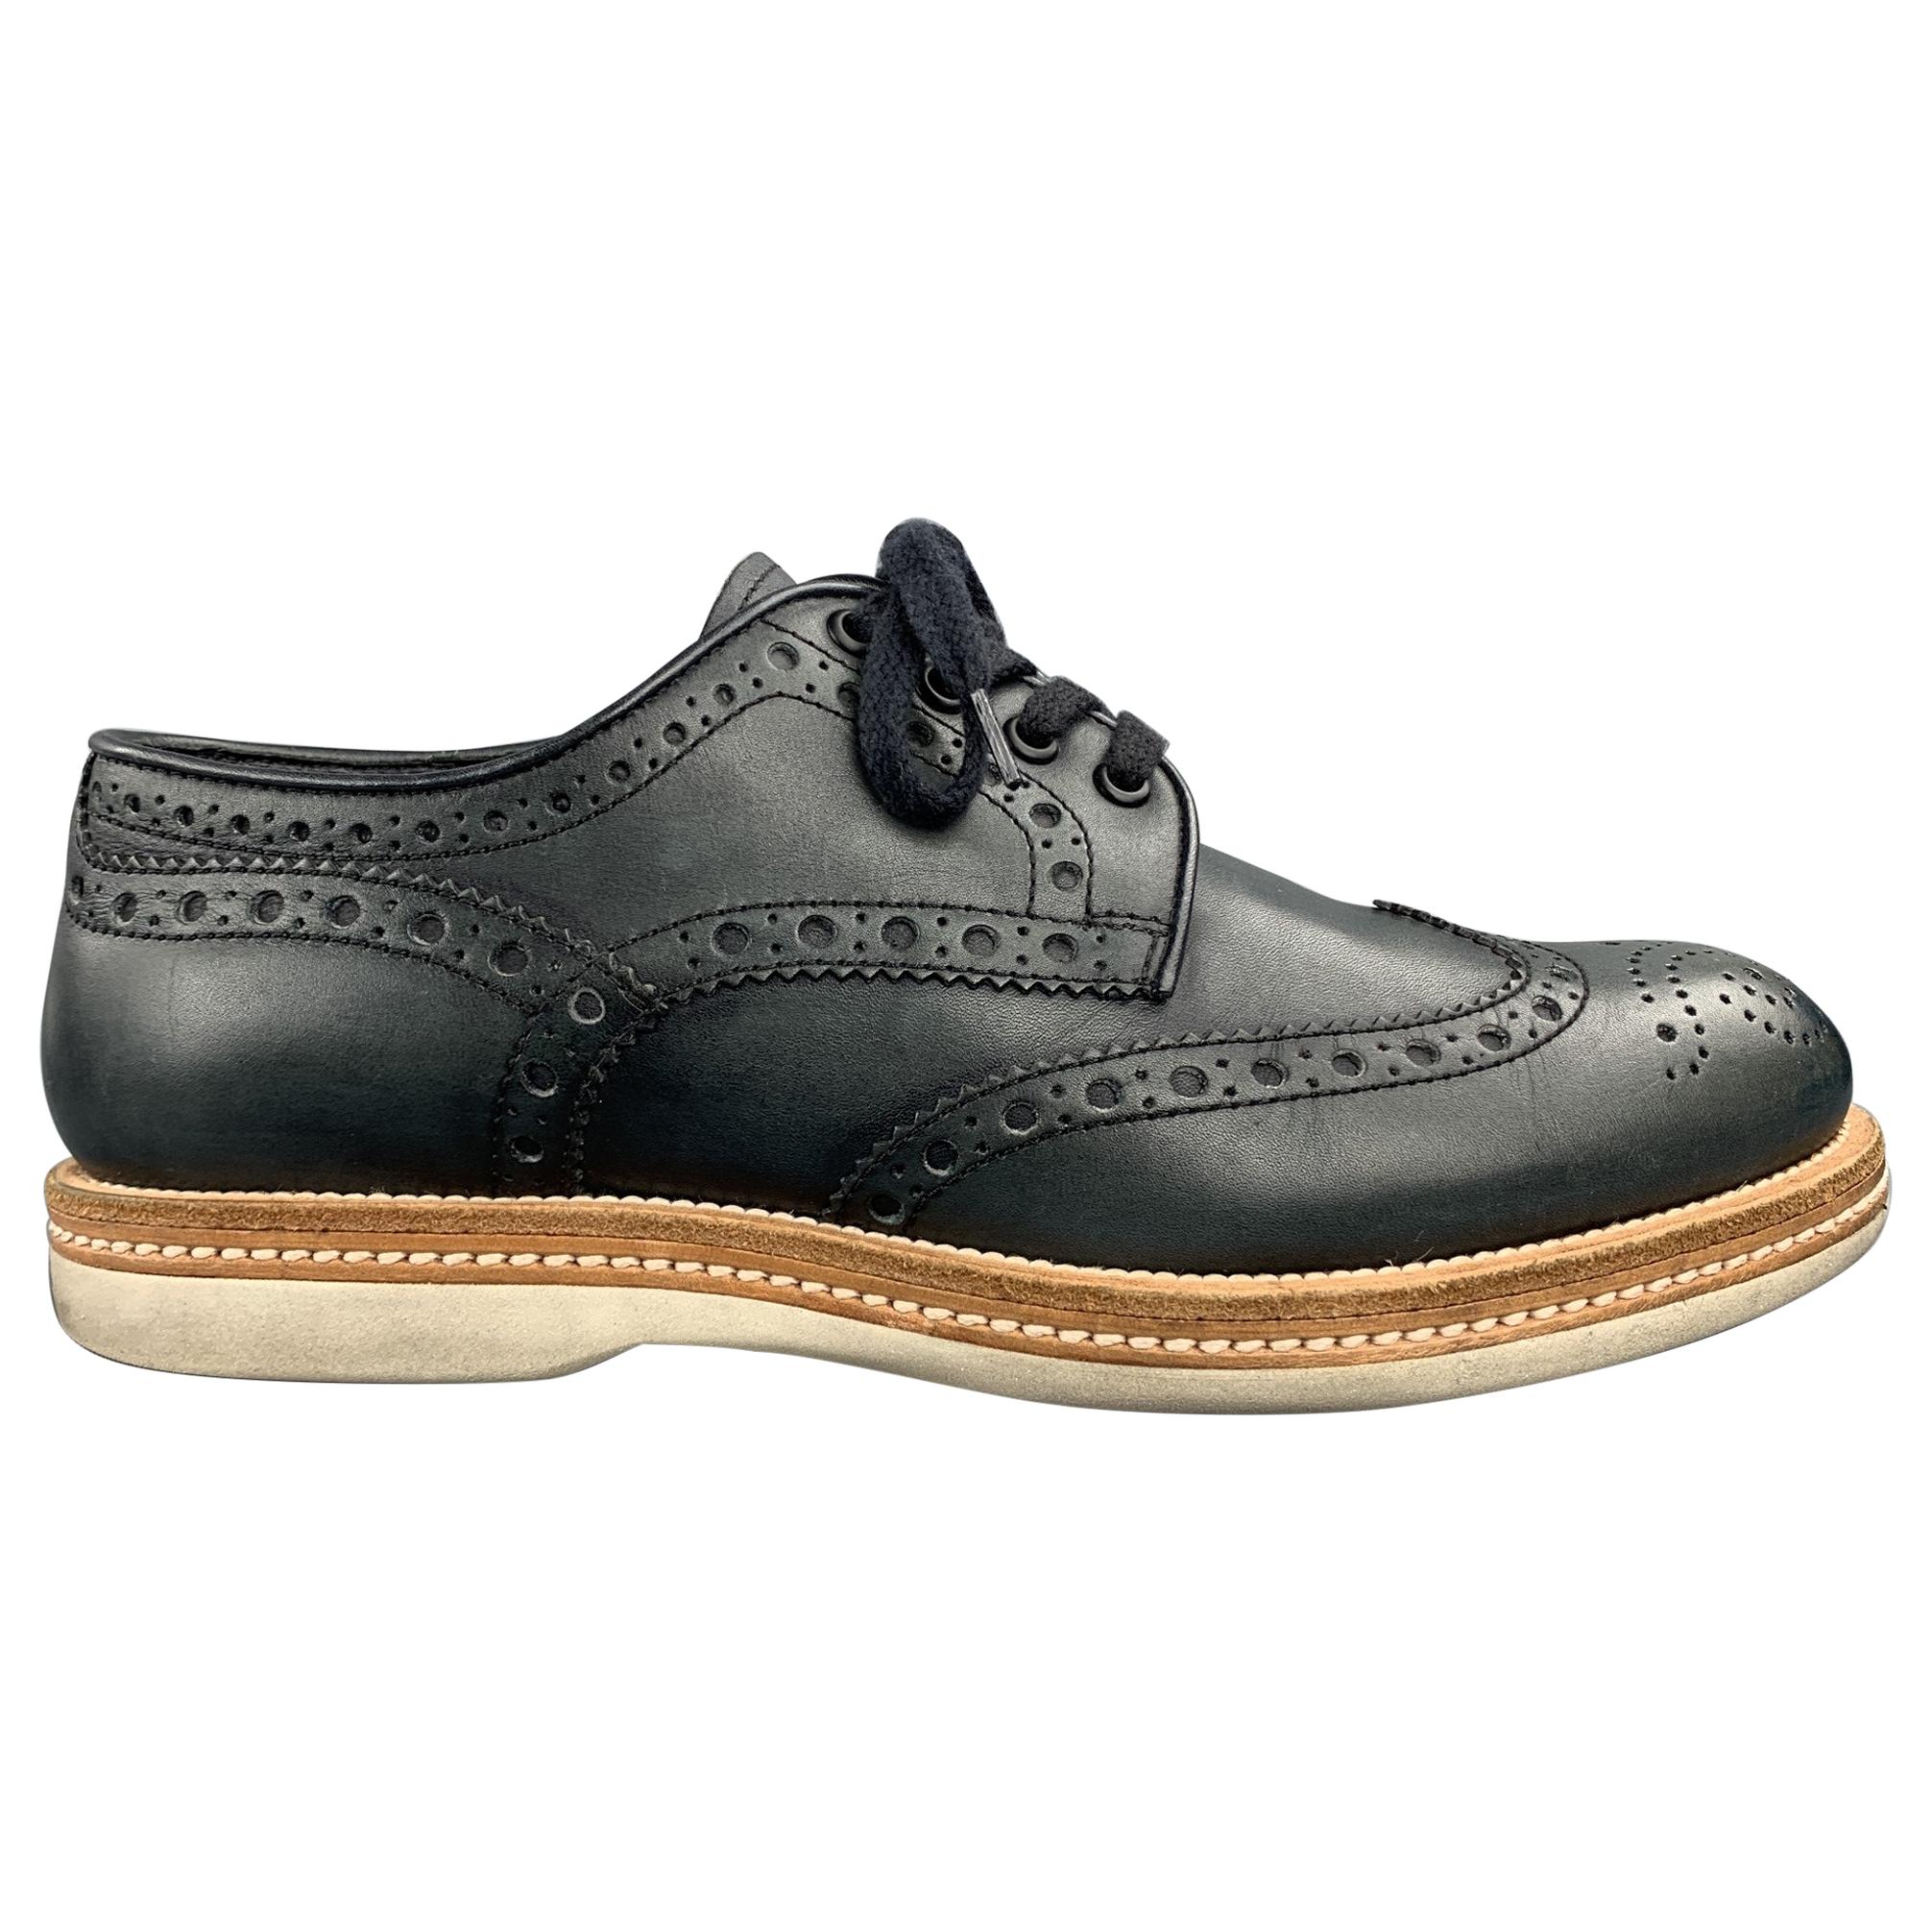 SANTONI Size 8 Navy Perforated Leather Wingtip Lace Up Shoes